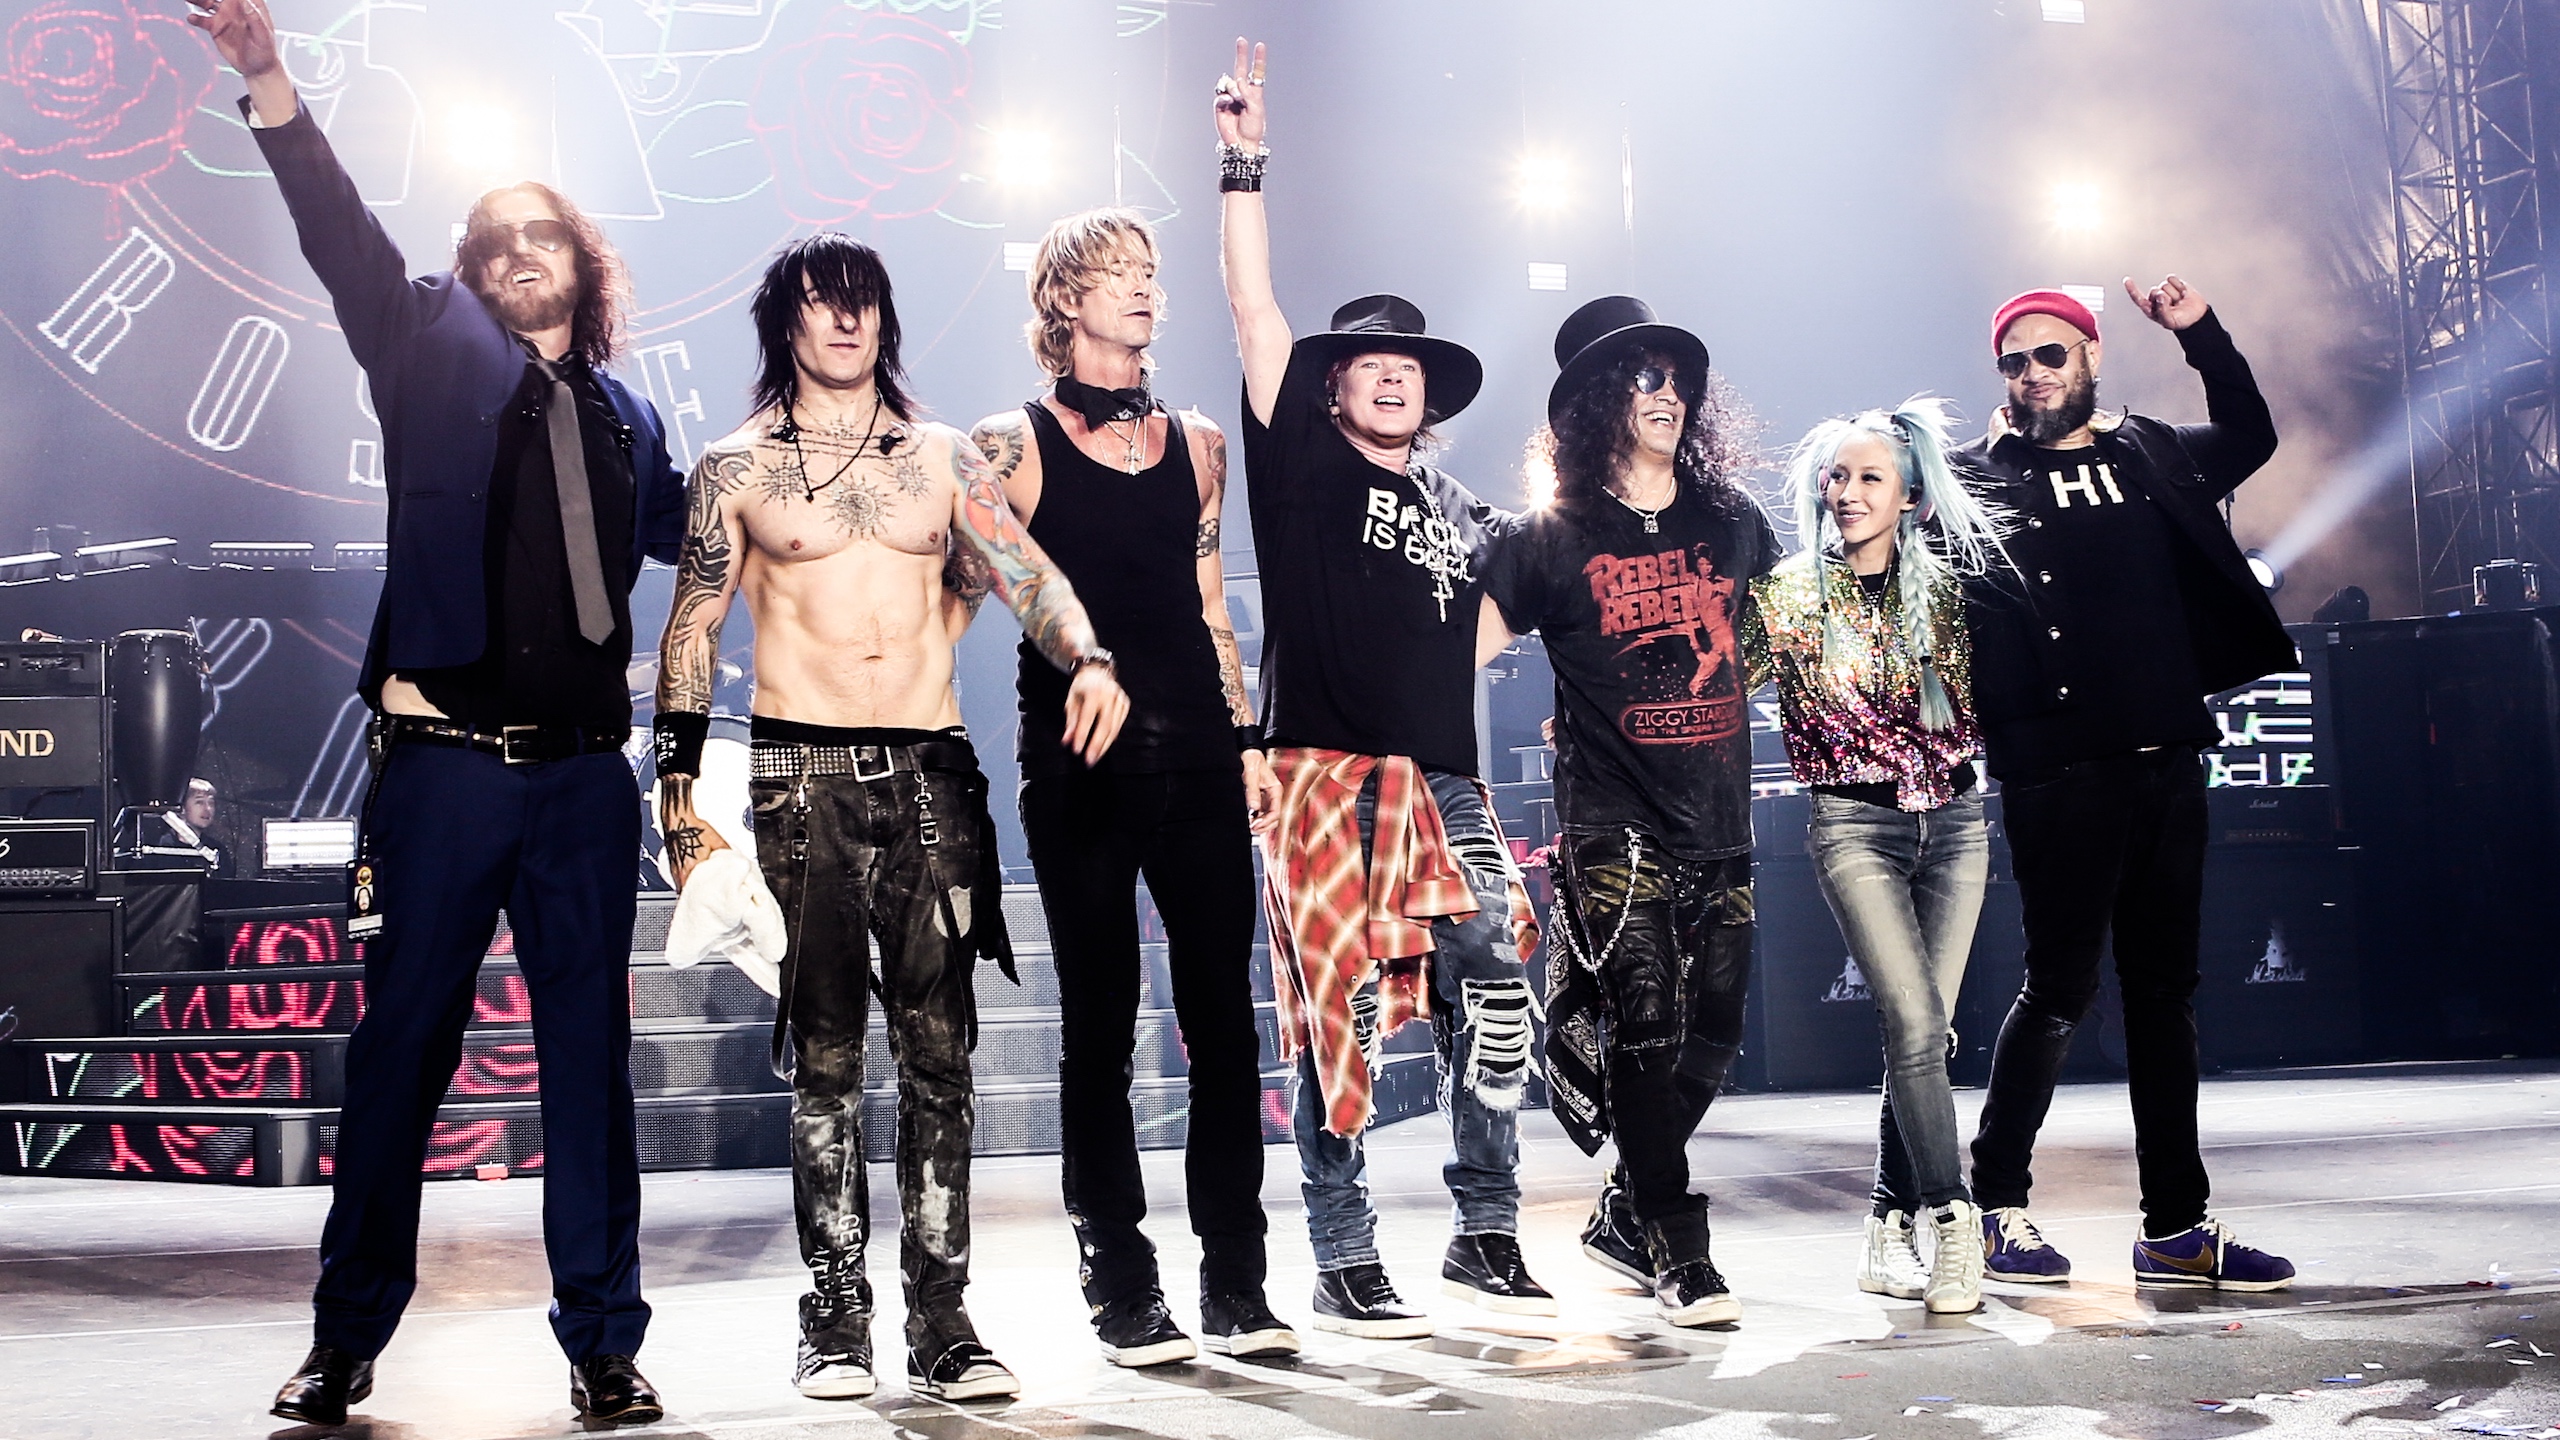 guns-n-roses-sell-1-million-more-tickets-in-24-hours